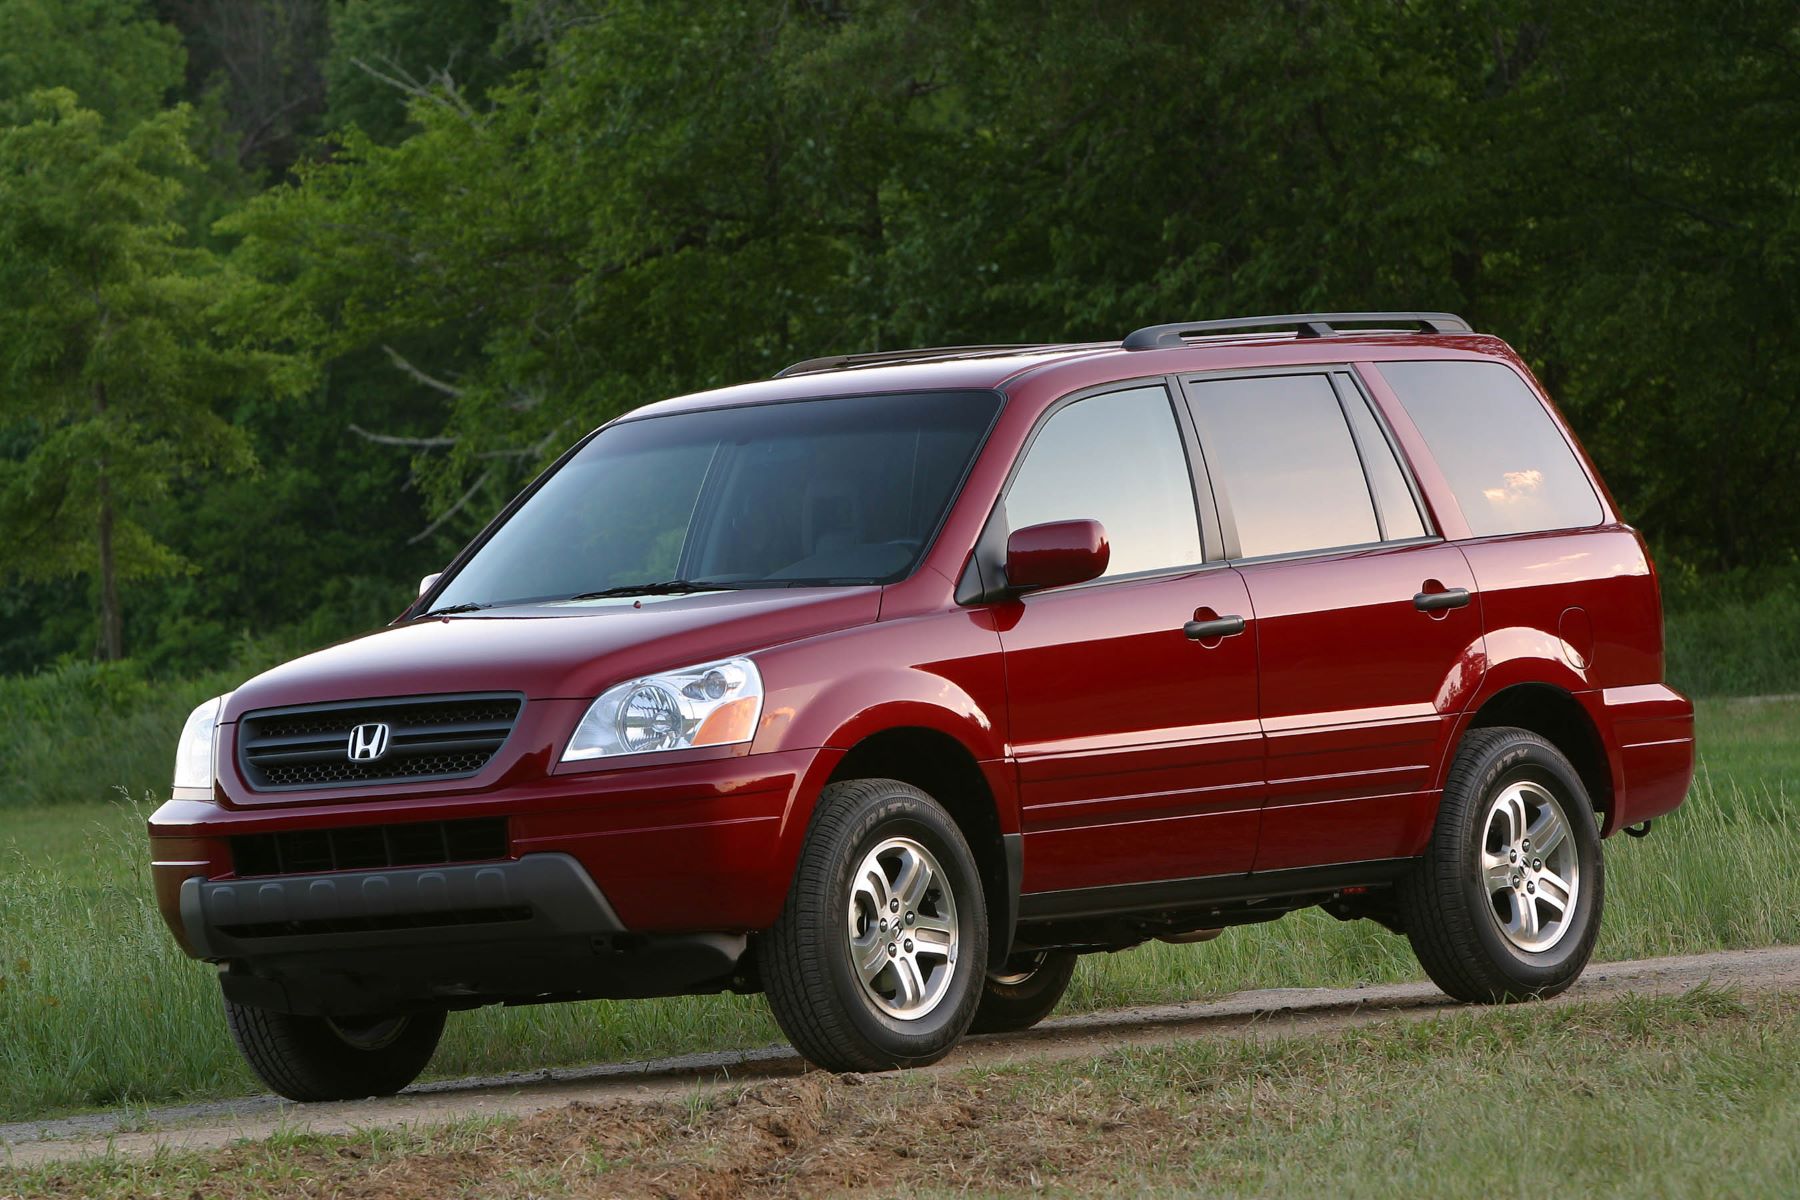 2003 Honda Pilot EX three-row mid-size crossover SUV in red is one of the worst Honda Pilot models